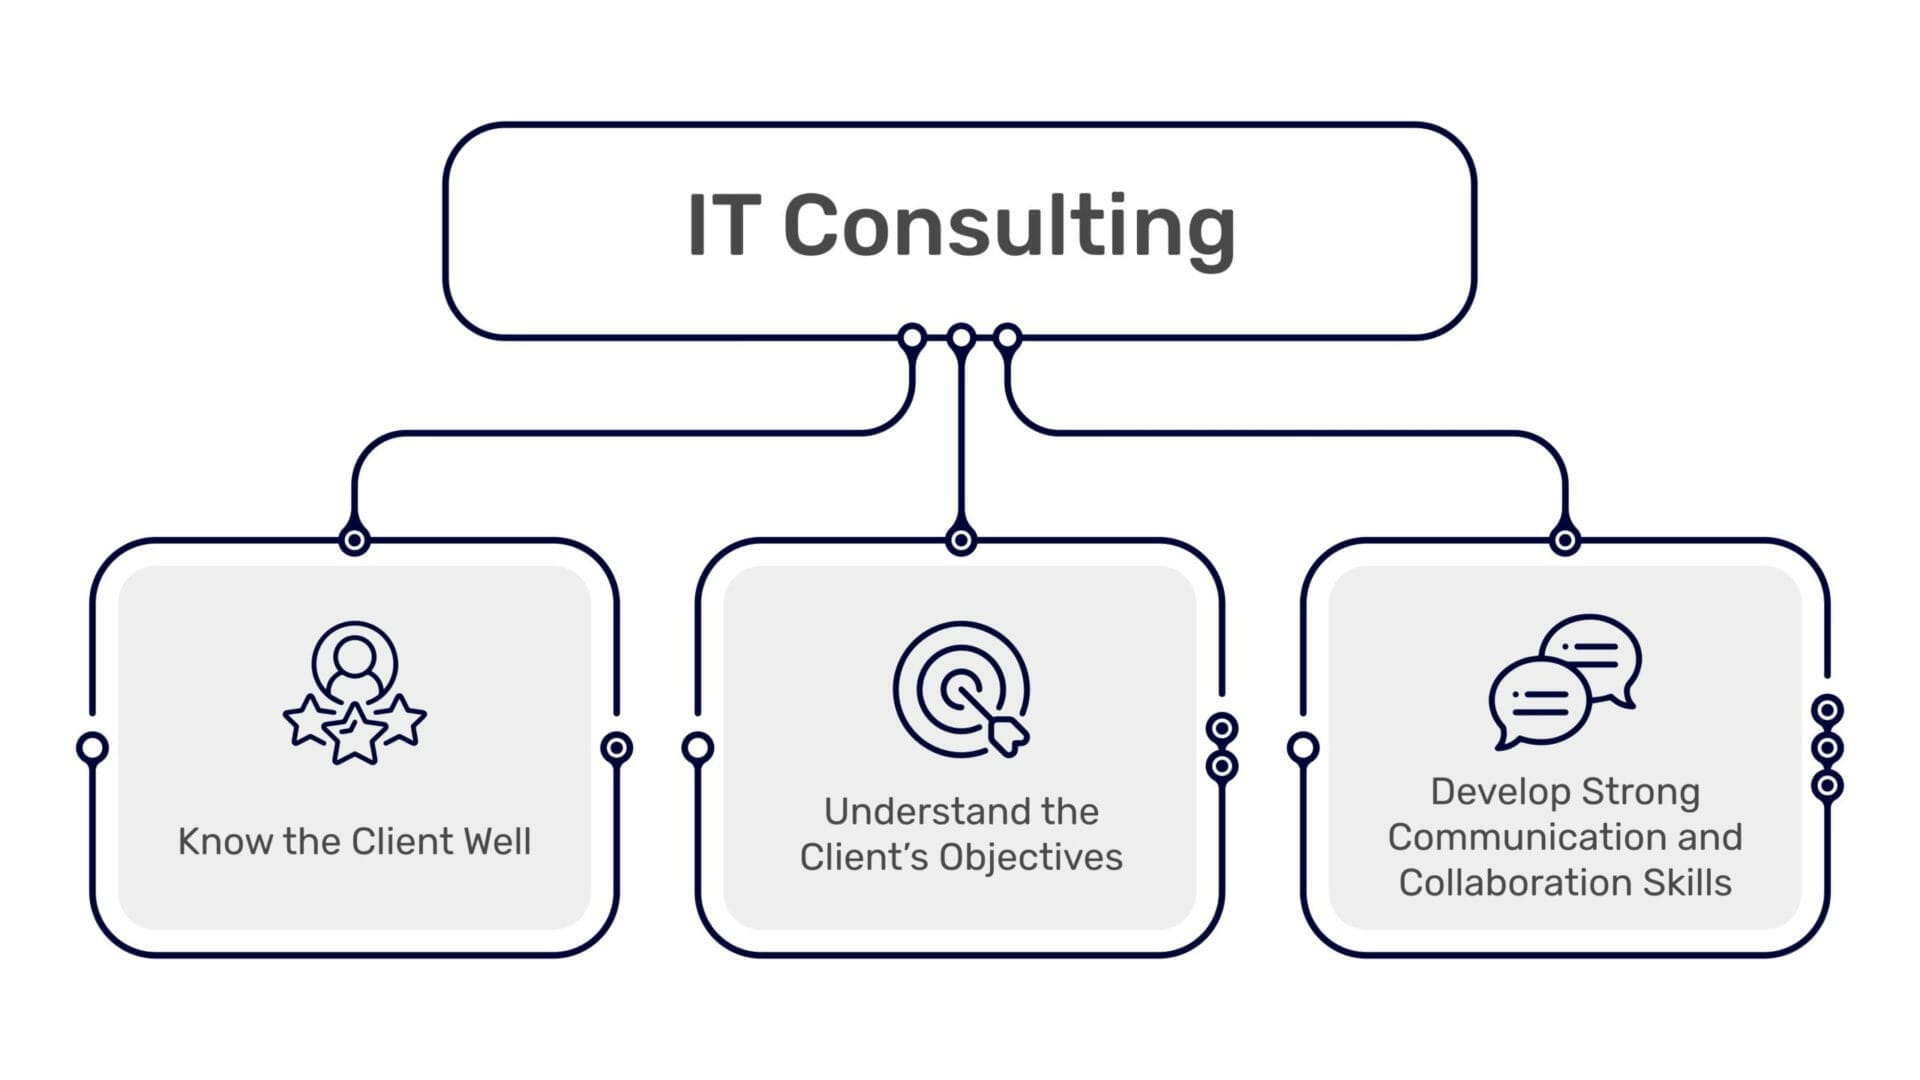 steps for IT consulting 